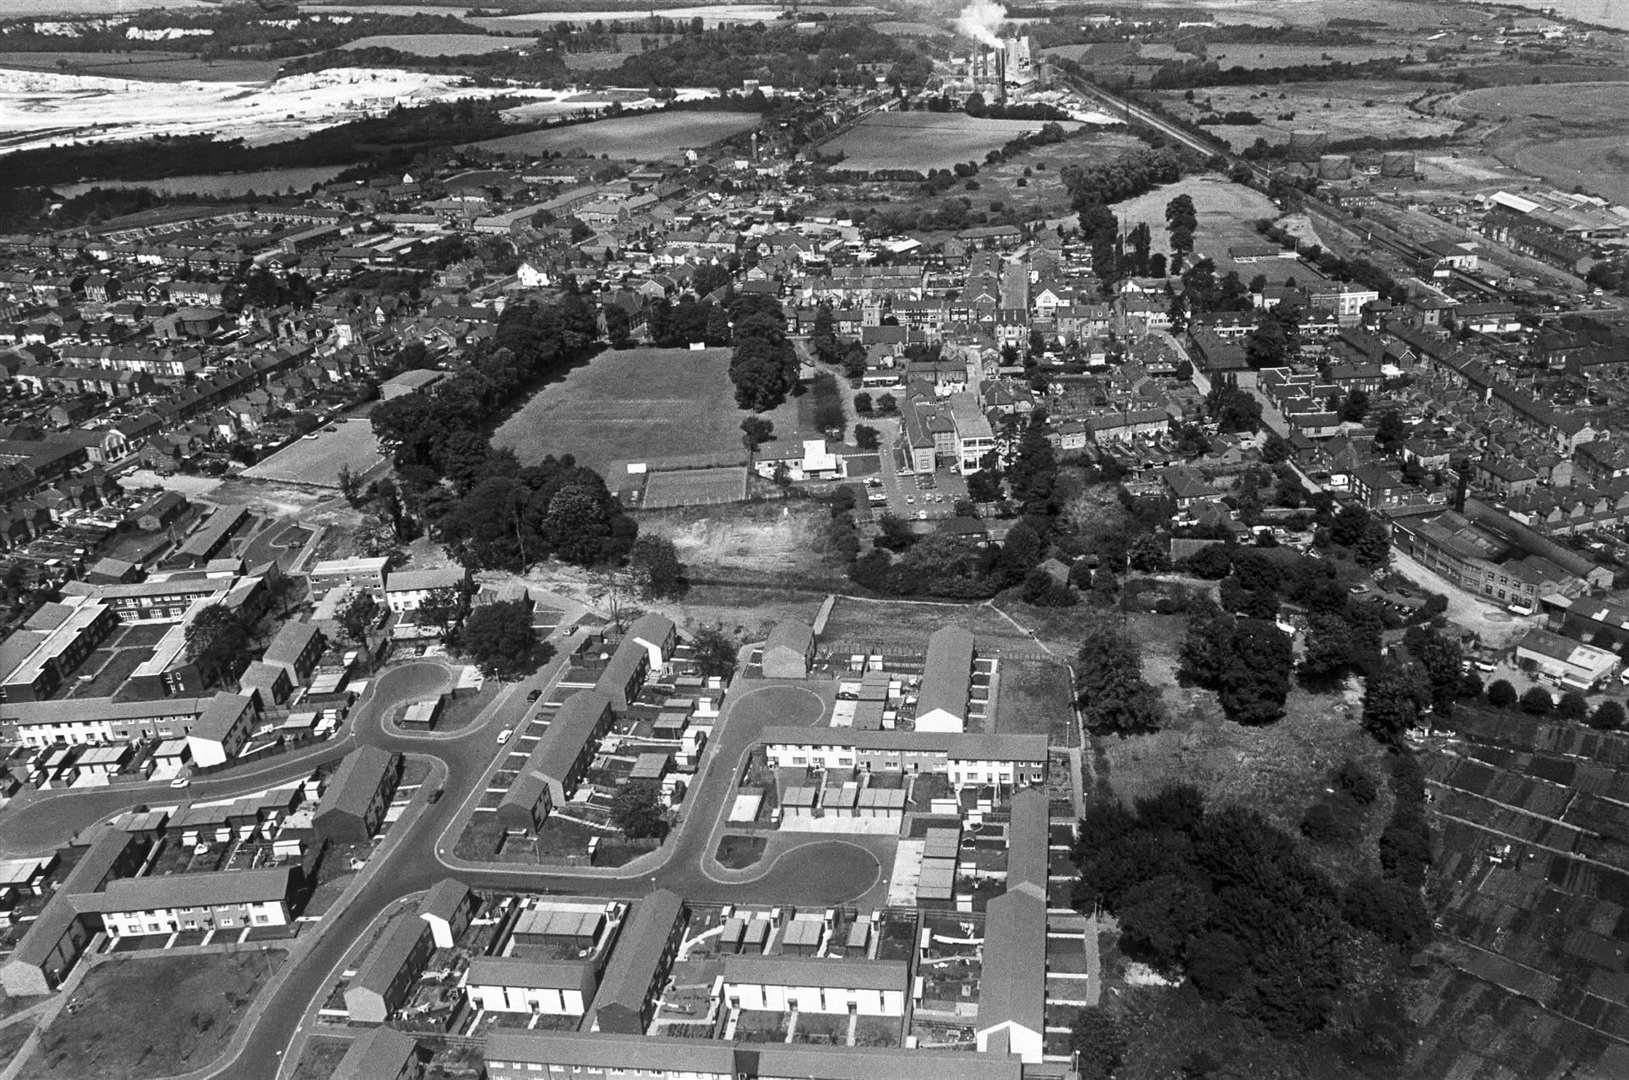 A view from August 1978 looking over Snodland. Old people's homes can be seen on the left in Rectory Close, with Saltings Road in the foreground, part of the Ham Hill estate, the cricket ground in the centre, Holborough cement works at the top and railway line and station to the right.